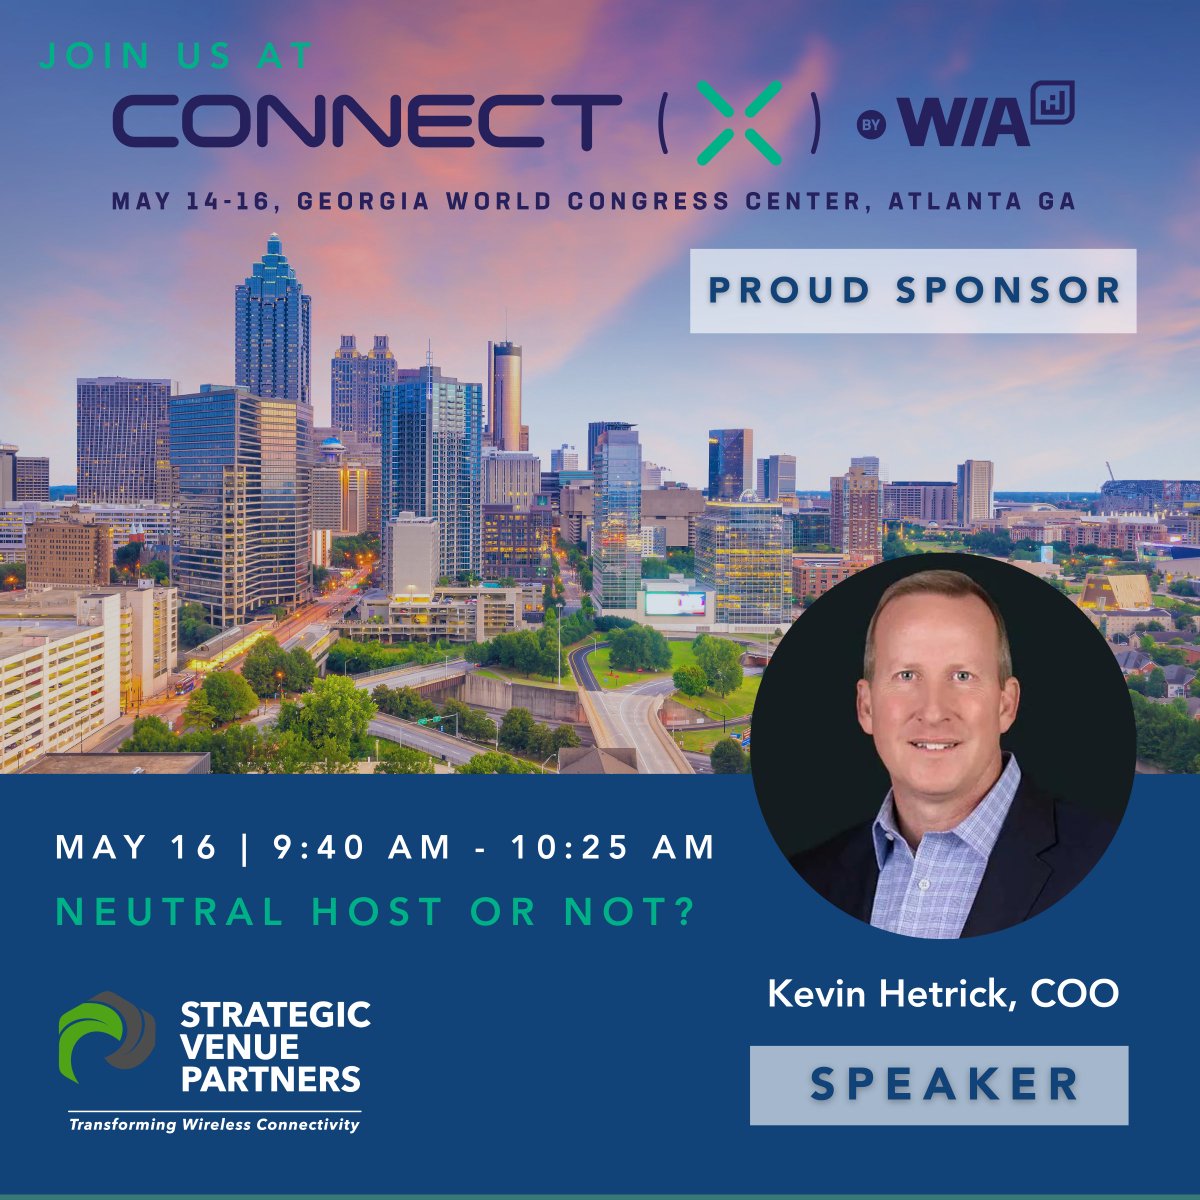 We look forward to seeing industry colleagues & friends next week at #ConnectX24. Don't miss SVP's COO Kevin Hetrick Thursday, May 16th at 9:40 AM for 'Neutral Host or Not?' - certain to be a great panel!